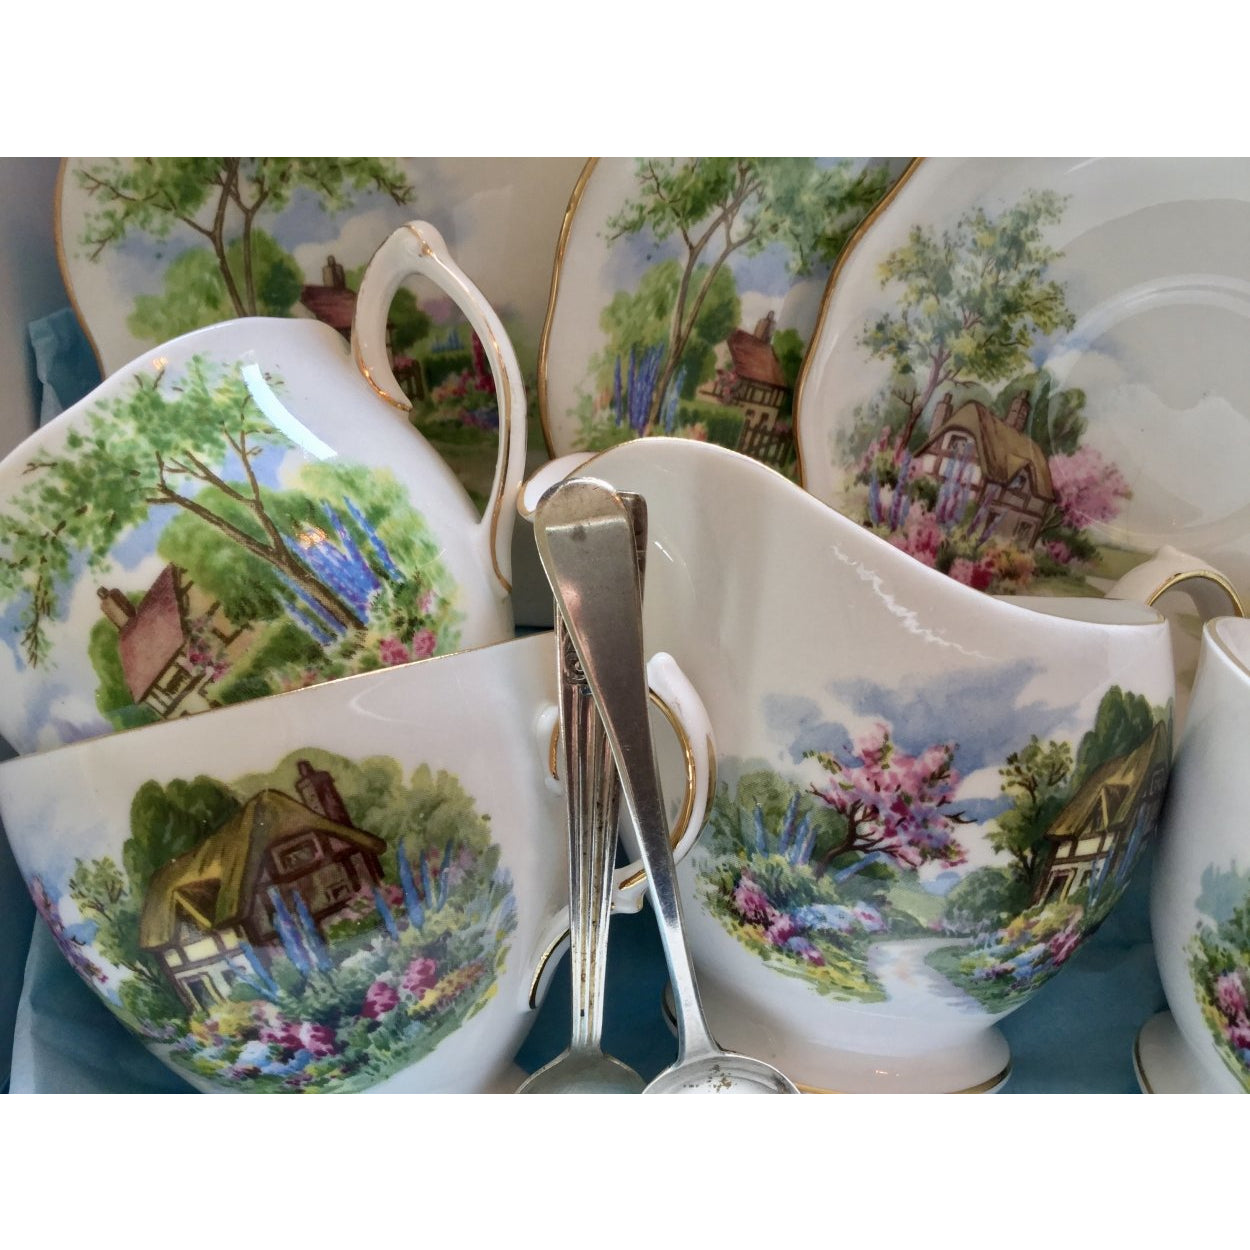 vintage china cups and saucers